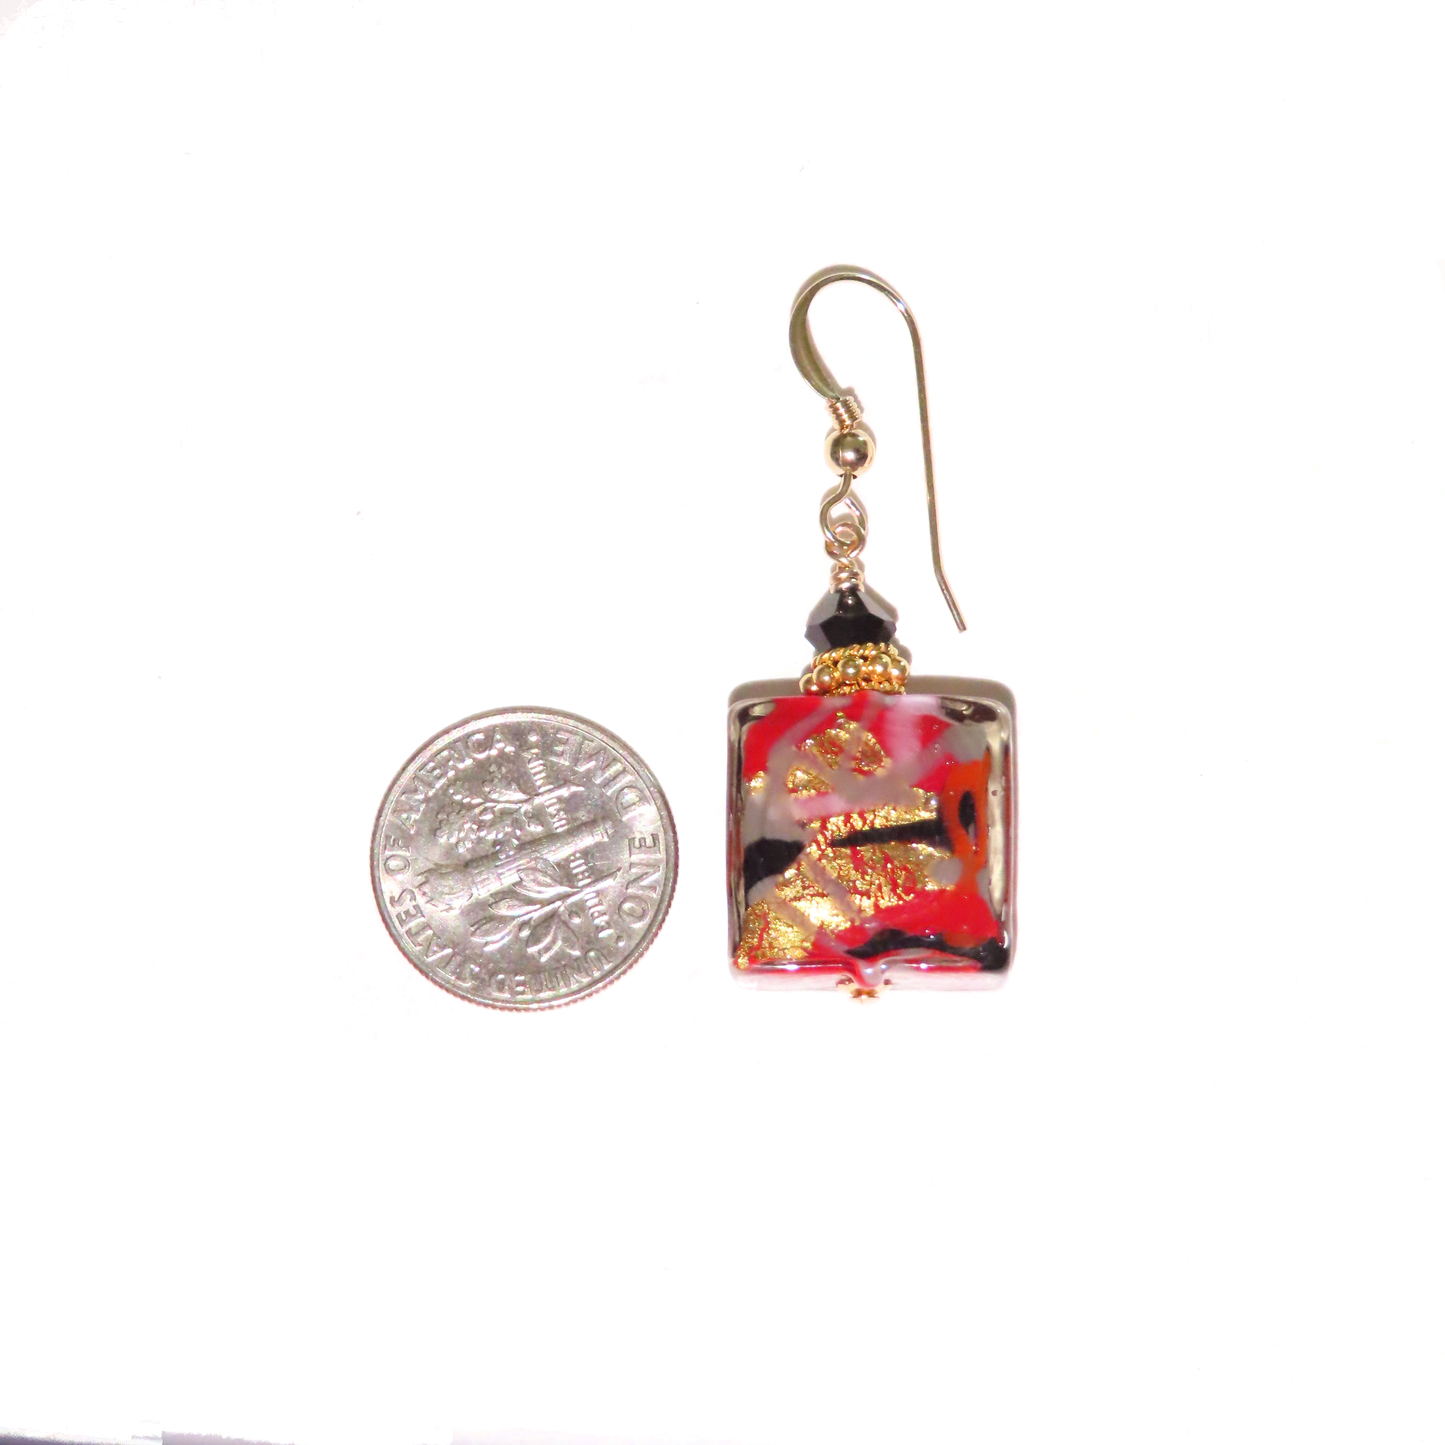 a pair of earrings sitting next to a coin